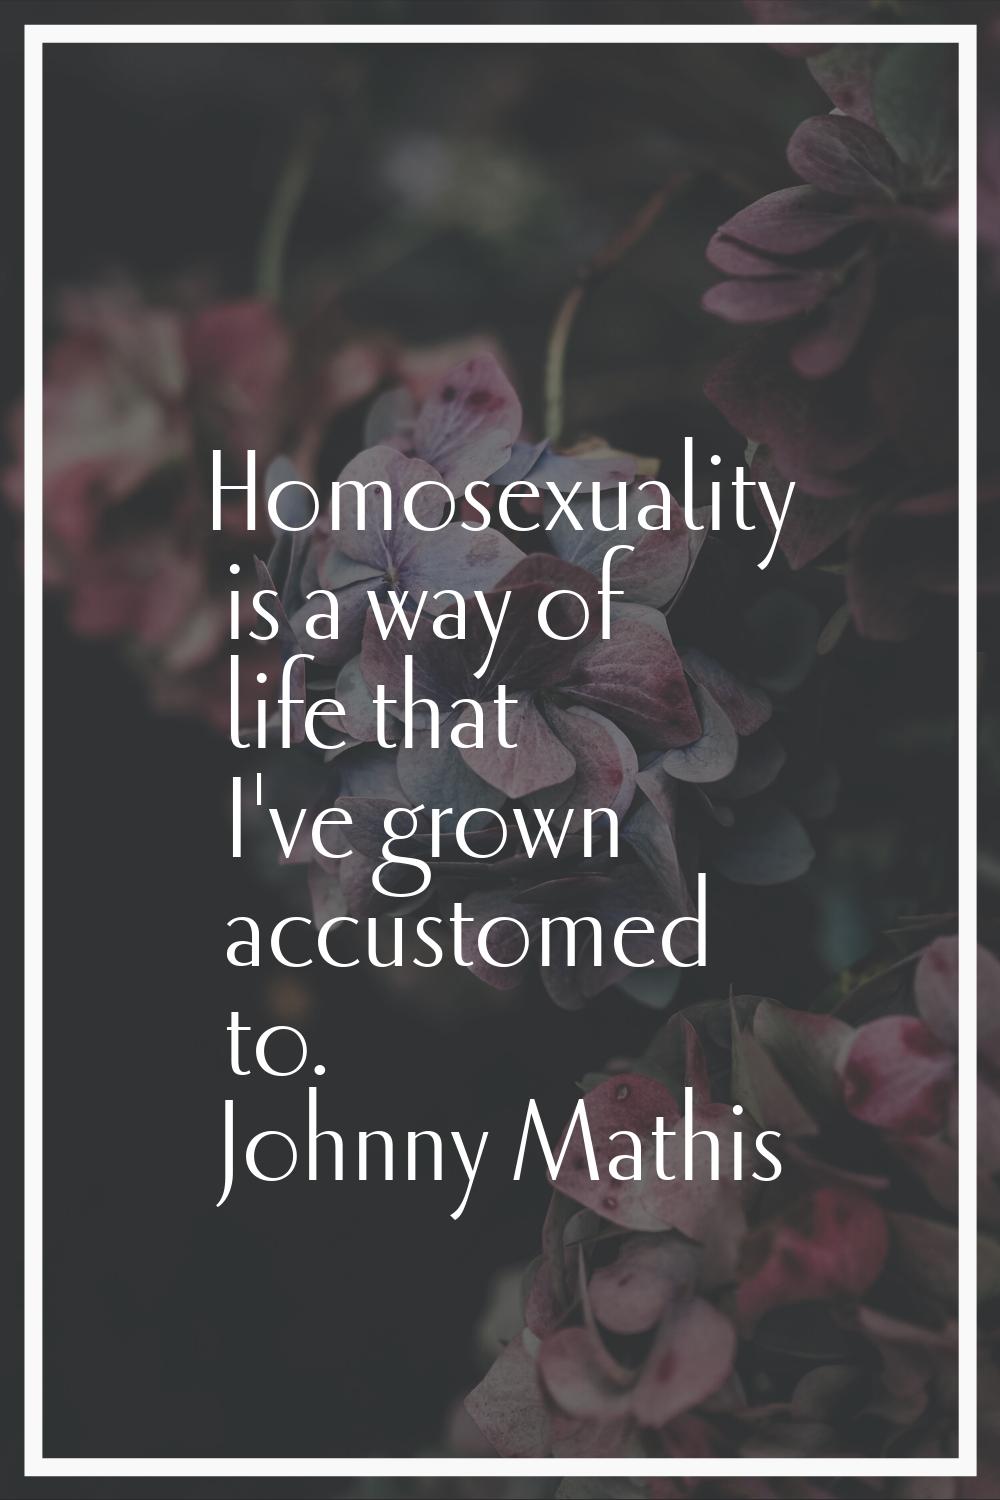 Homosexuality is a way of life that I've grown accustomed to.